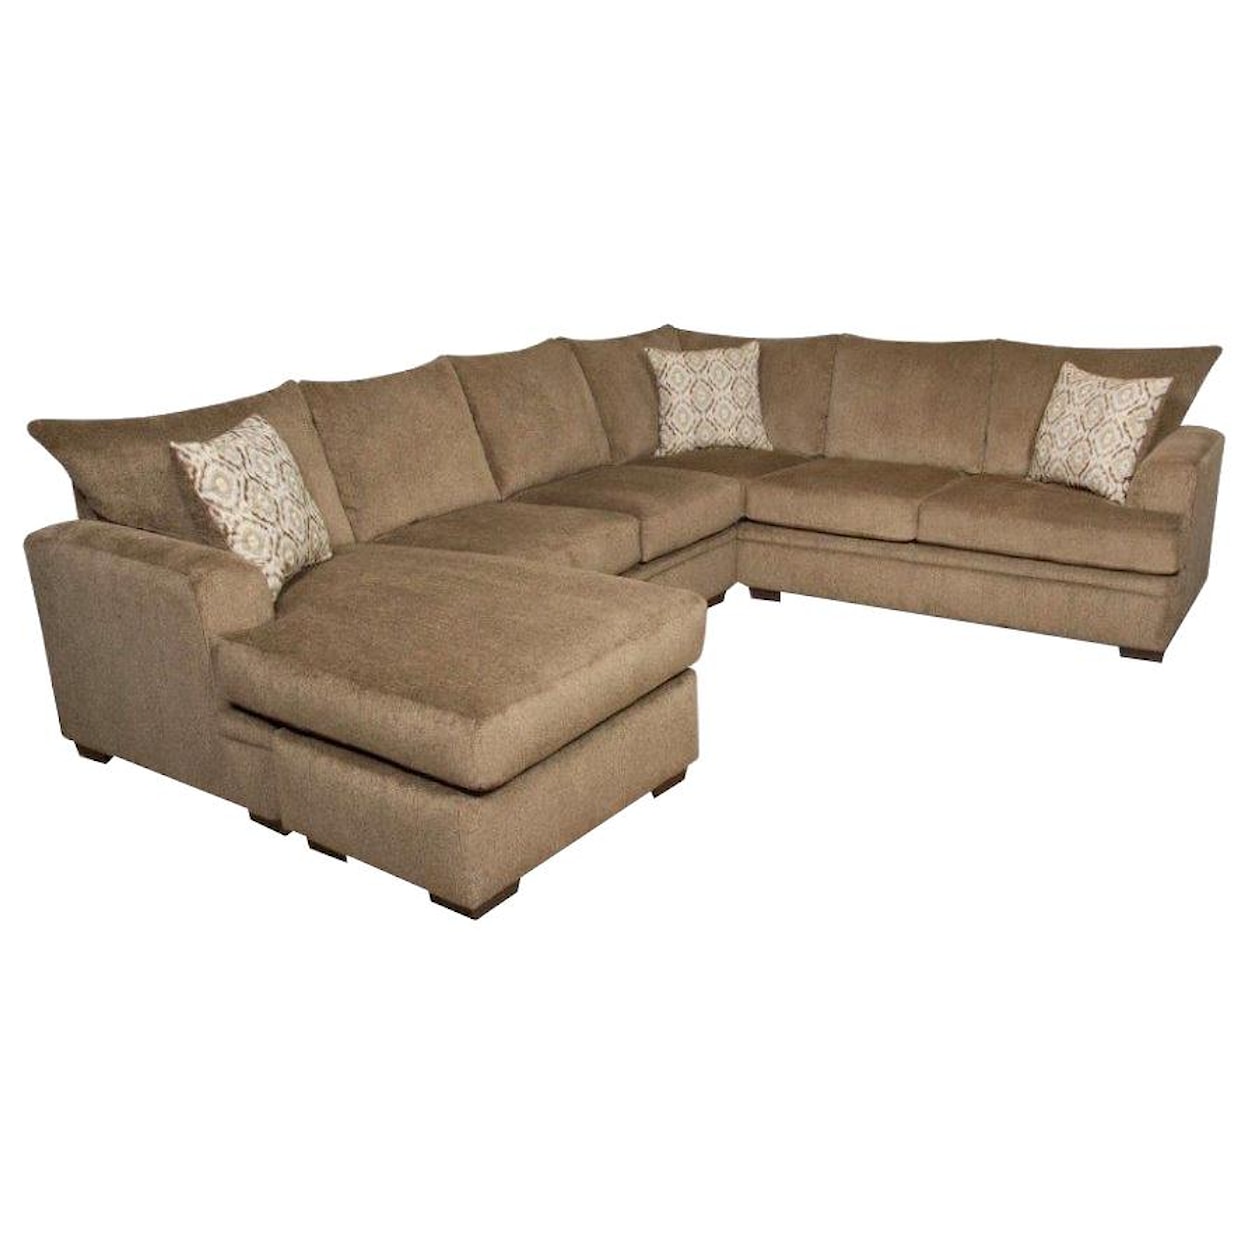 Peak Living 6800 Sectional Sofa with Left Side Chaise